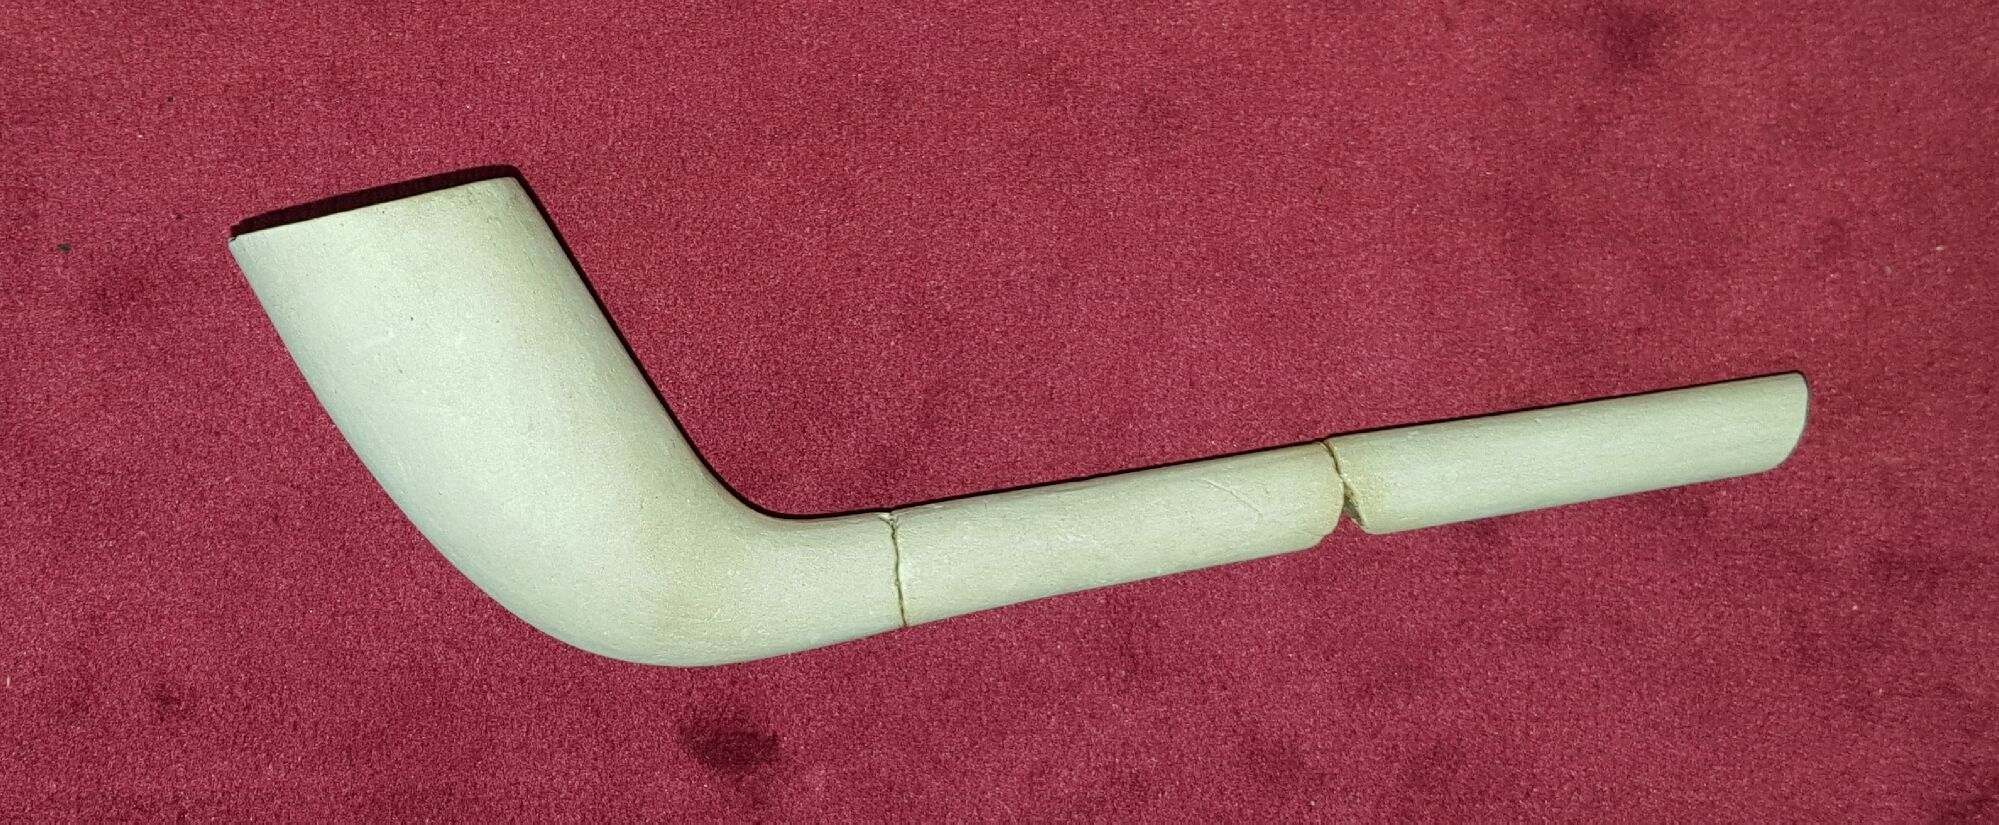 18th century kaolin pipe with partial stem